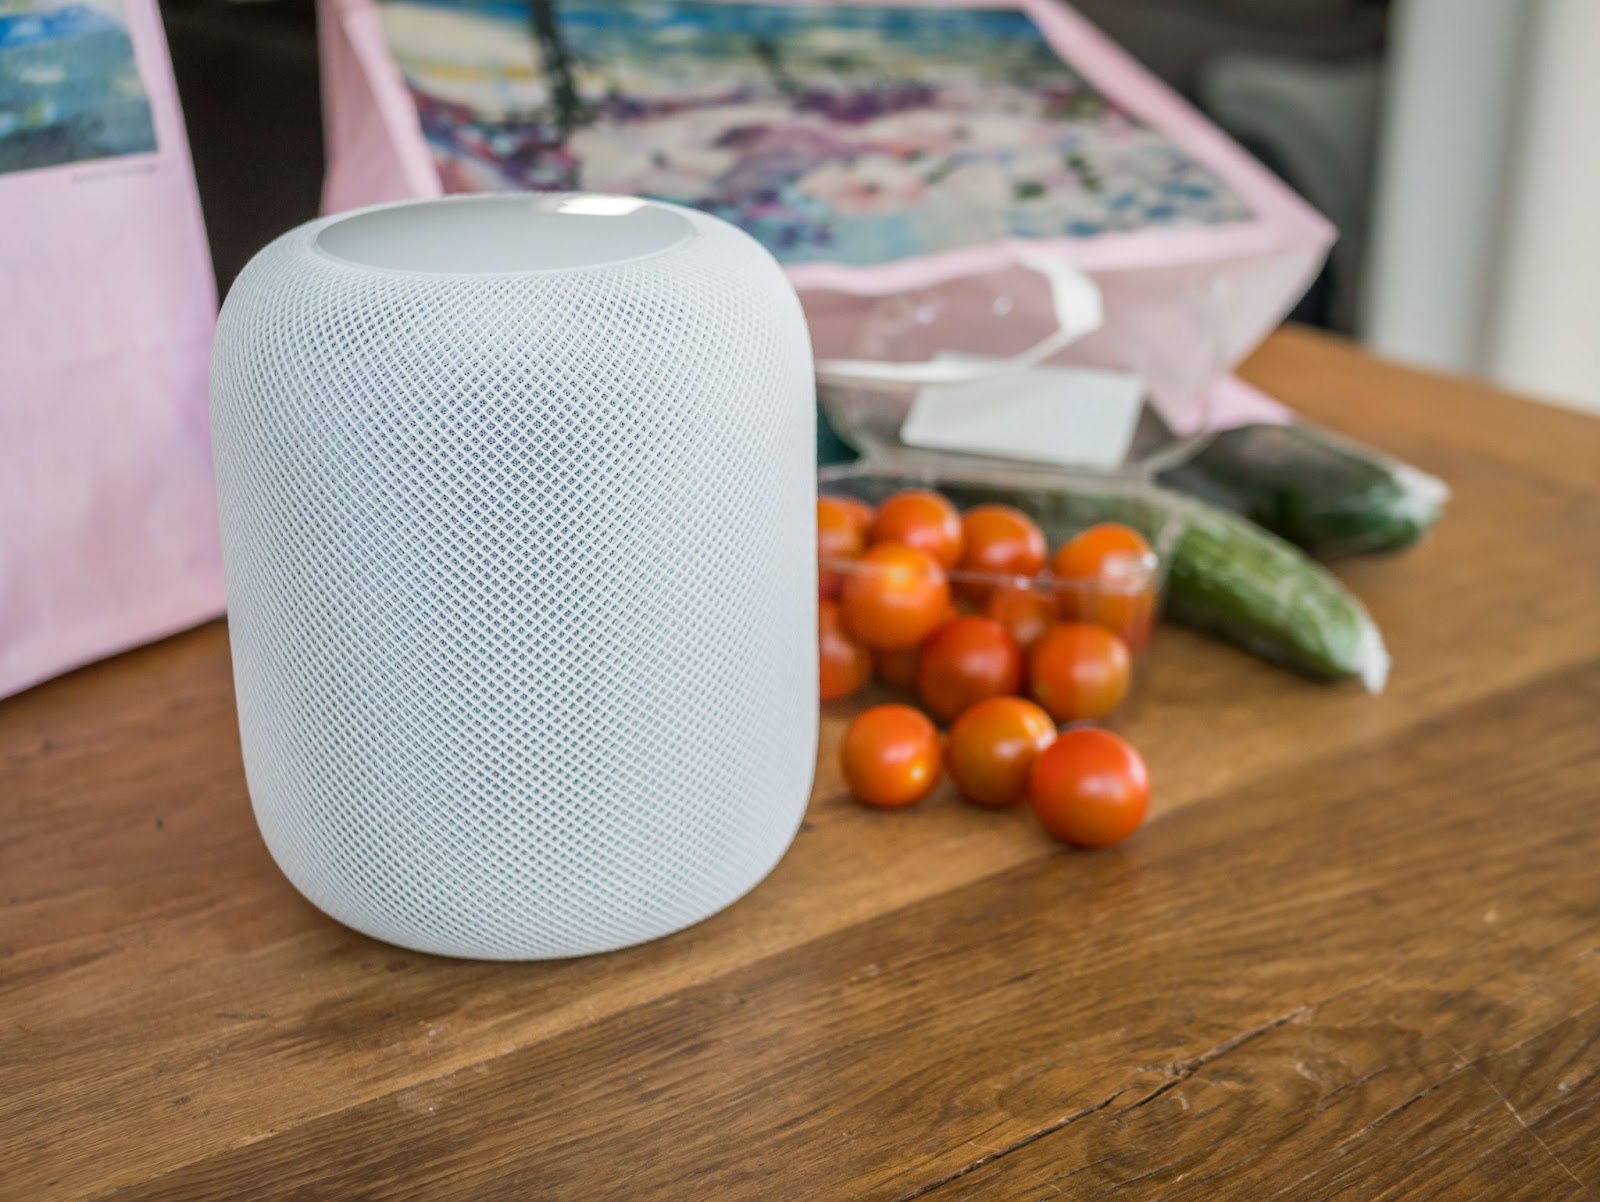 Shop online using a smart speaker. Grocery and food delivery at home.